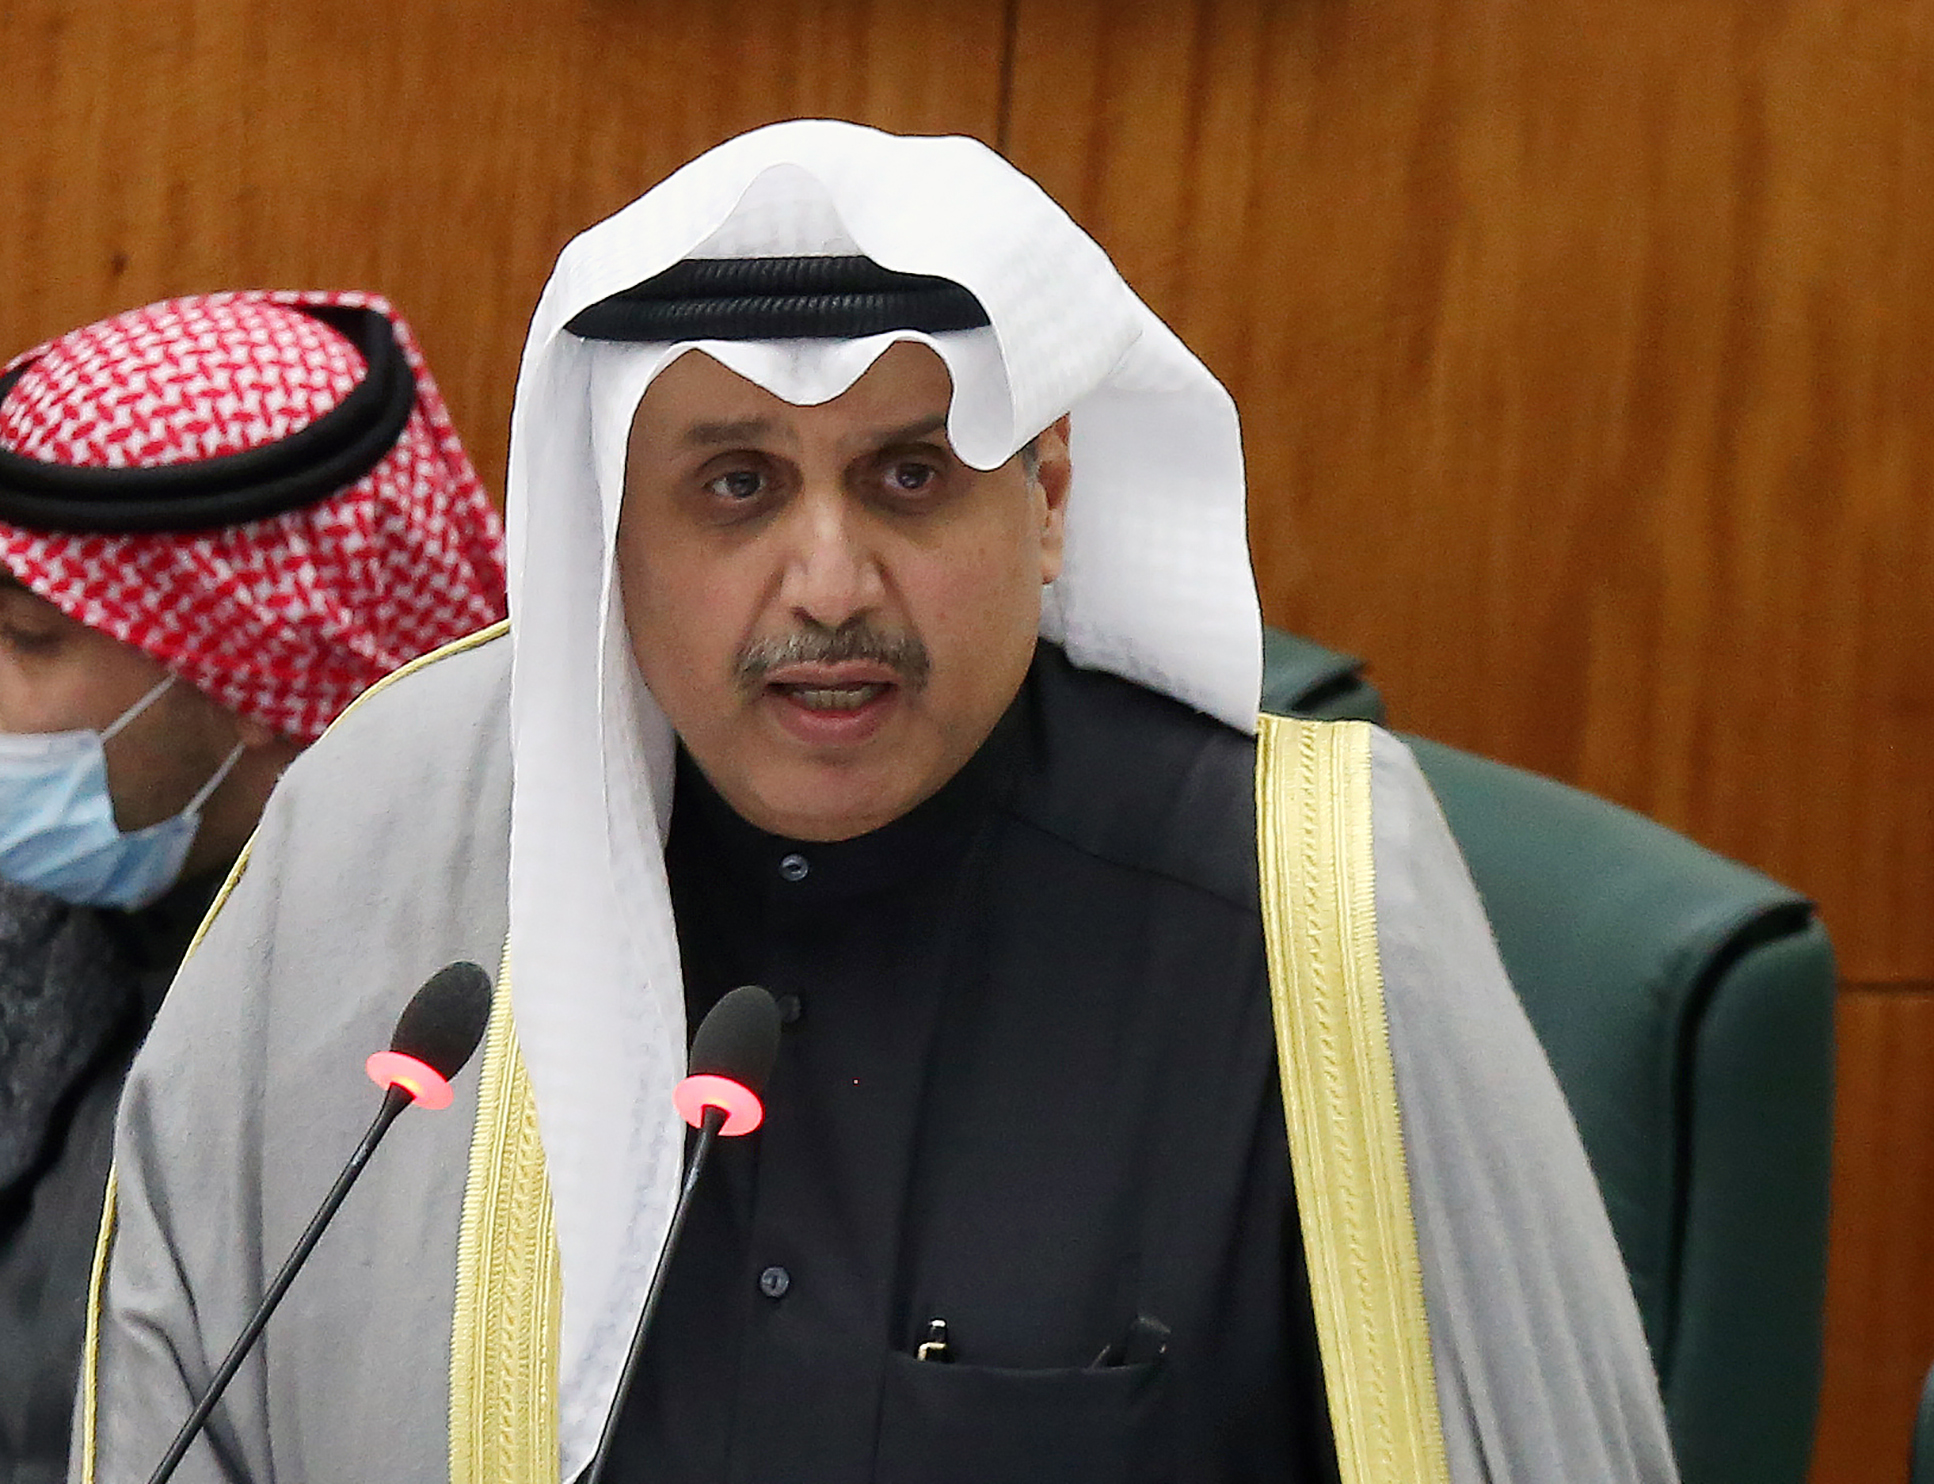 KUWAIT: Defense Minister Sheikh Hamad Jaber Al-Ali Al-Sabah speaks during the debate of his interpellation motion at the National Assembly yesterday. — Photo by Yasser Al-Zayyat